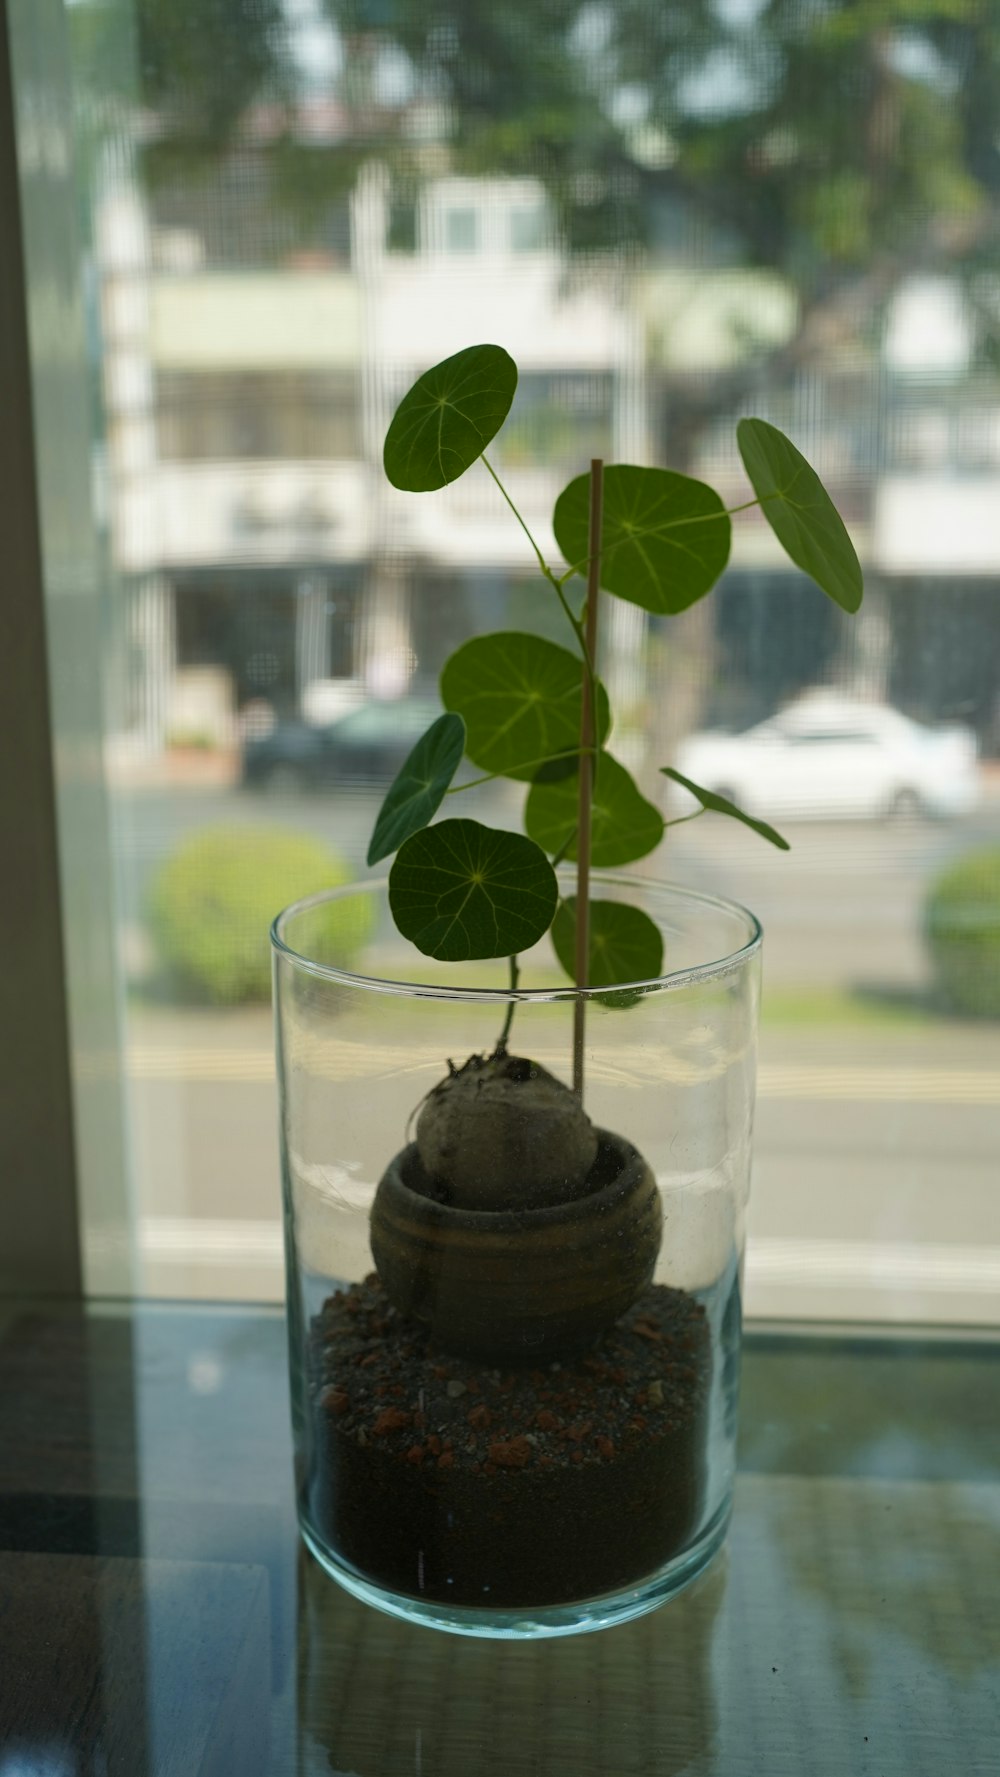 a small plant in a glass vase on a table